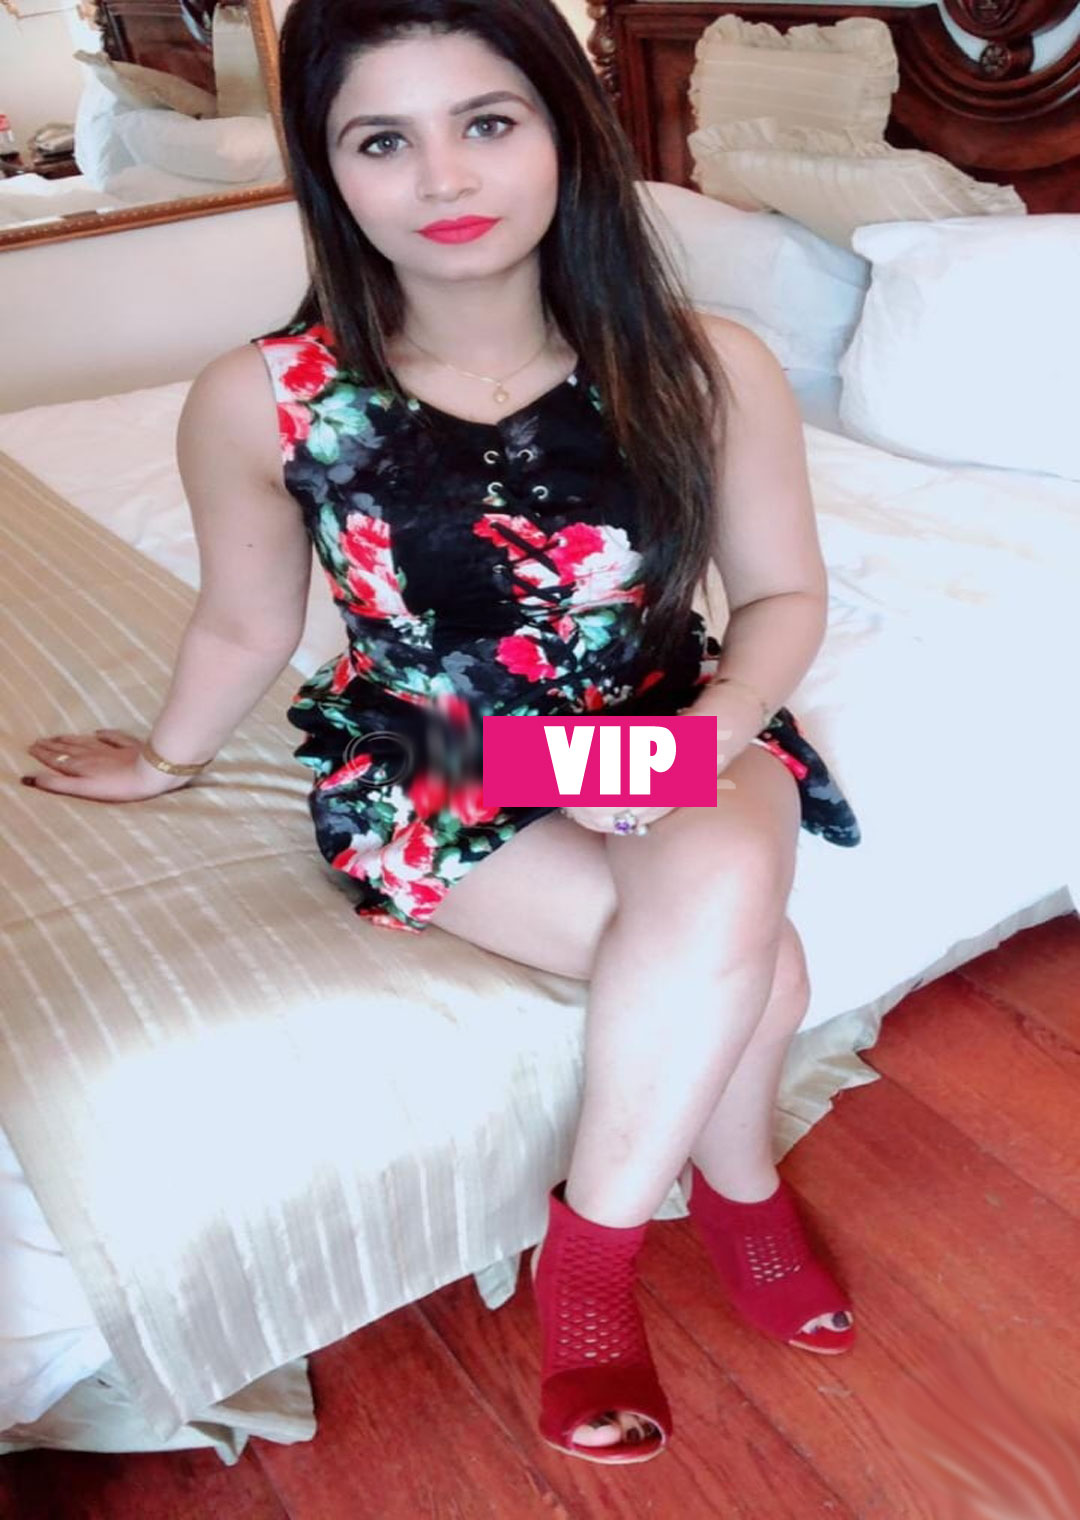 Professional Call Girls in Delhi Have Lot of Experience